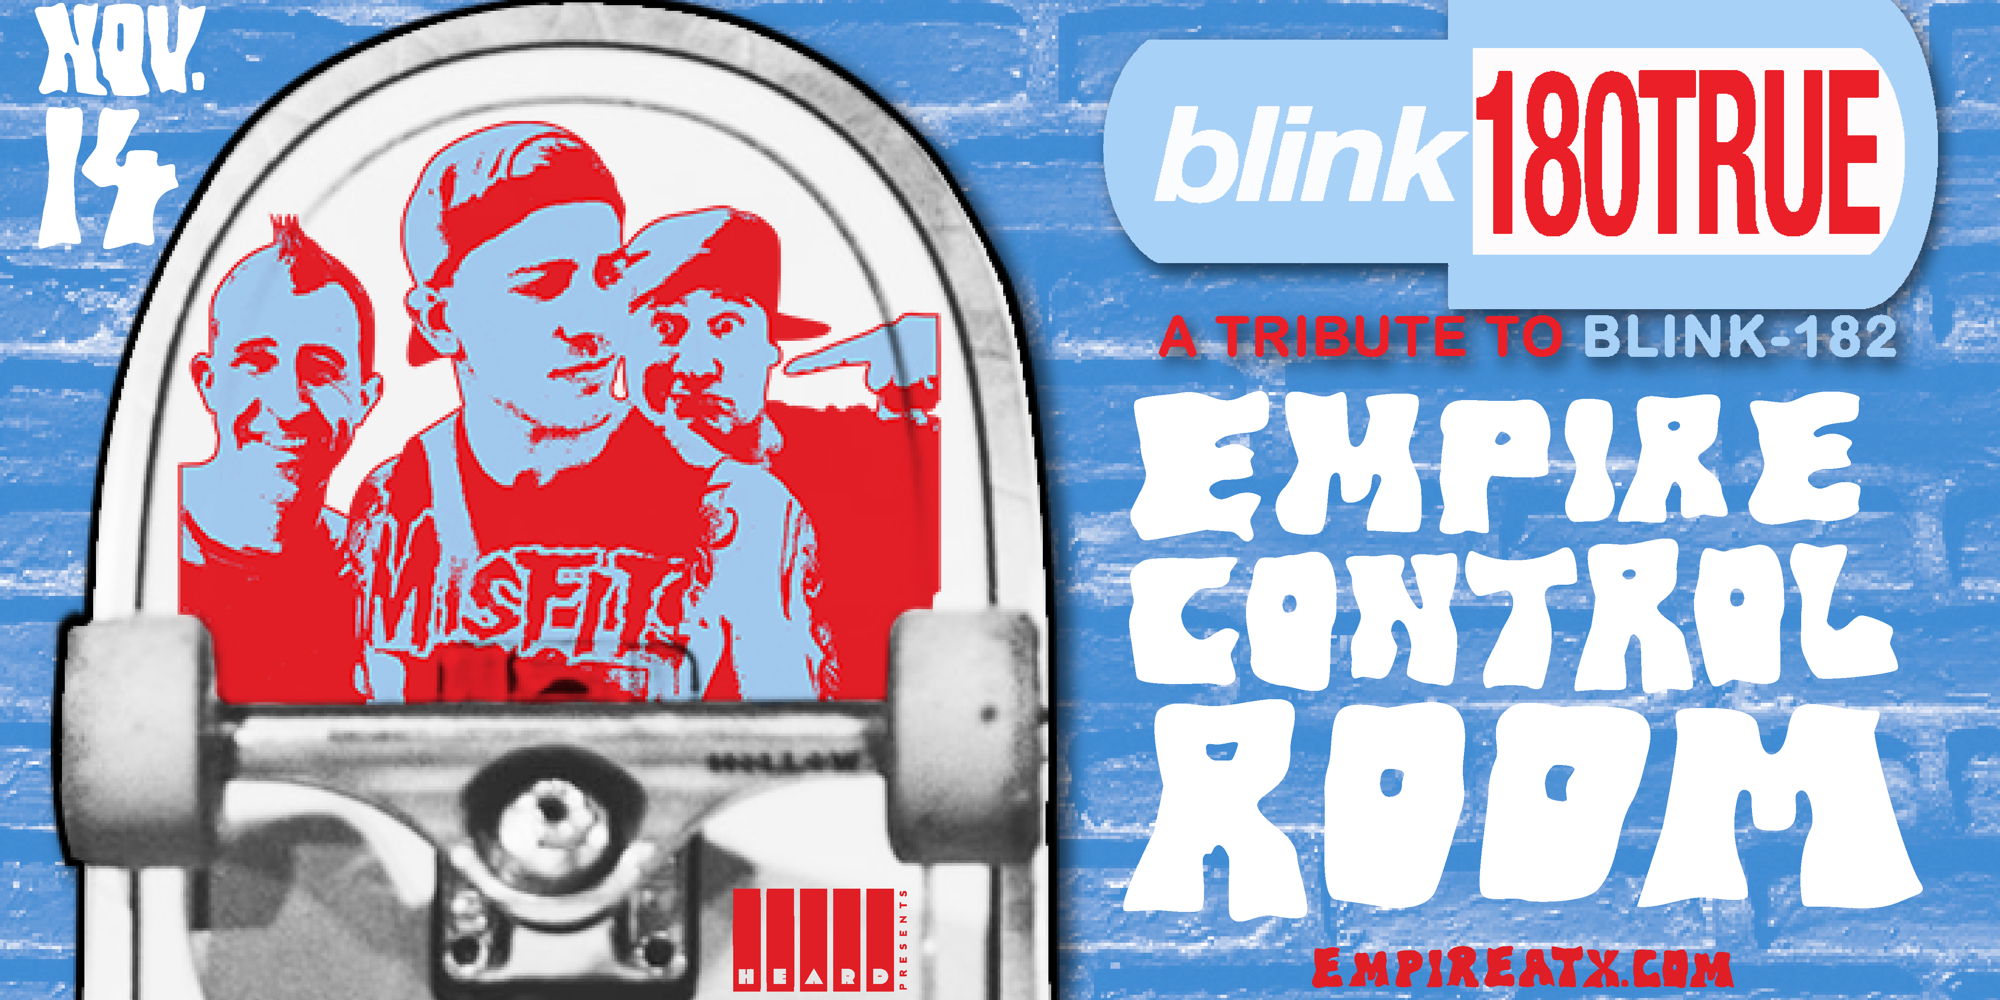 Blink 180 True at Empire Control Room - 11/14 promotional image